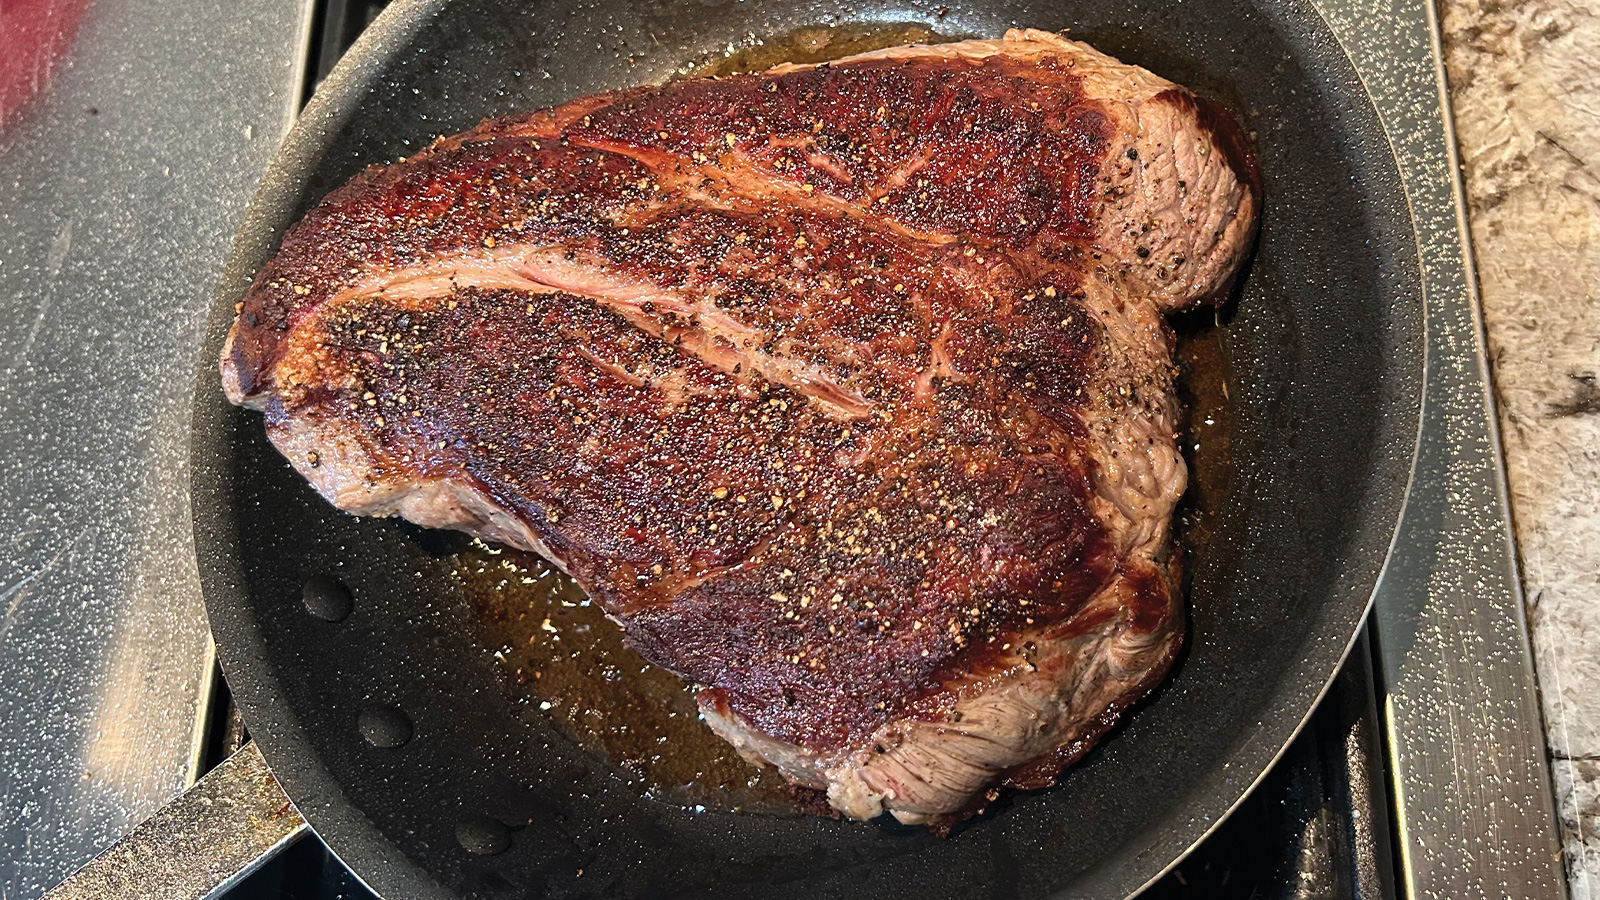 Searing a slab of steak on stovetop